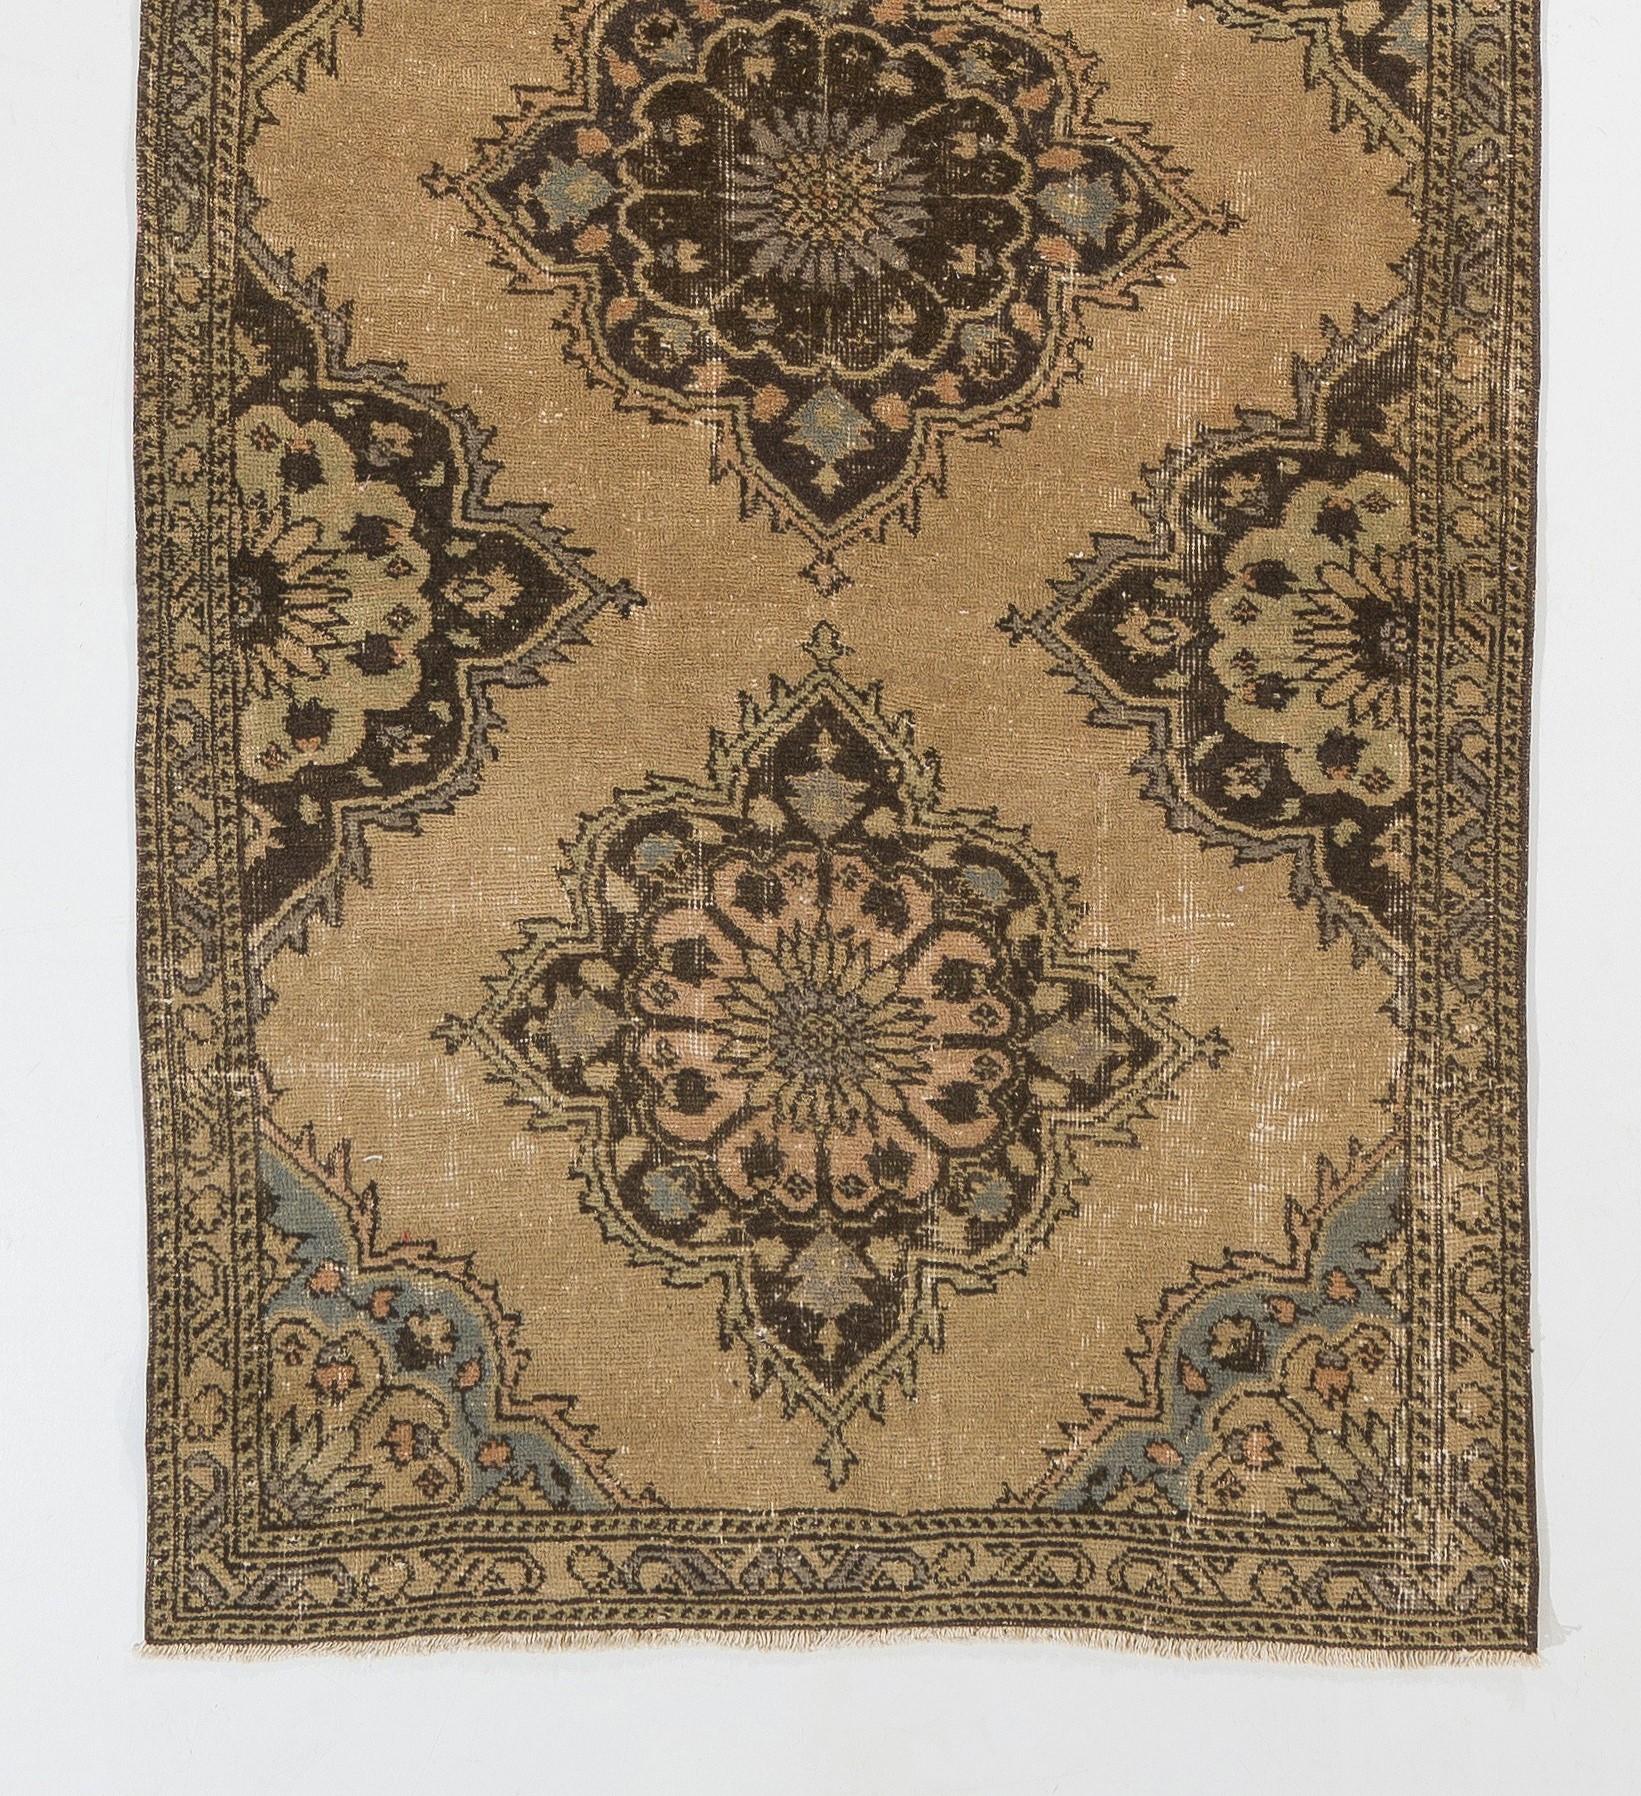 20th Century 3.6x11.7 Ft Hand-Knotted Turkish Oushak Wool Runner Rug. Vintage Corridor Carpet For Sale